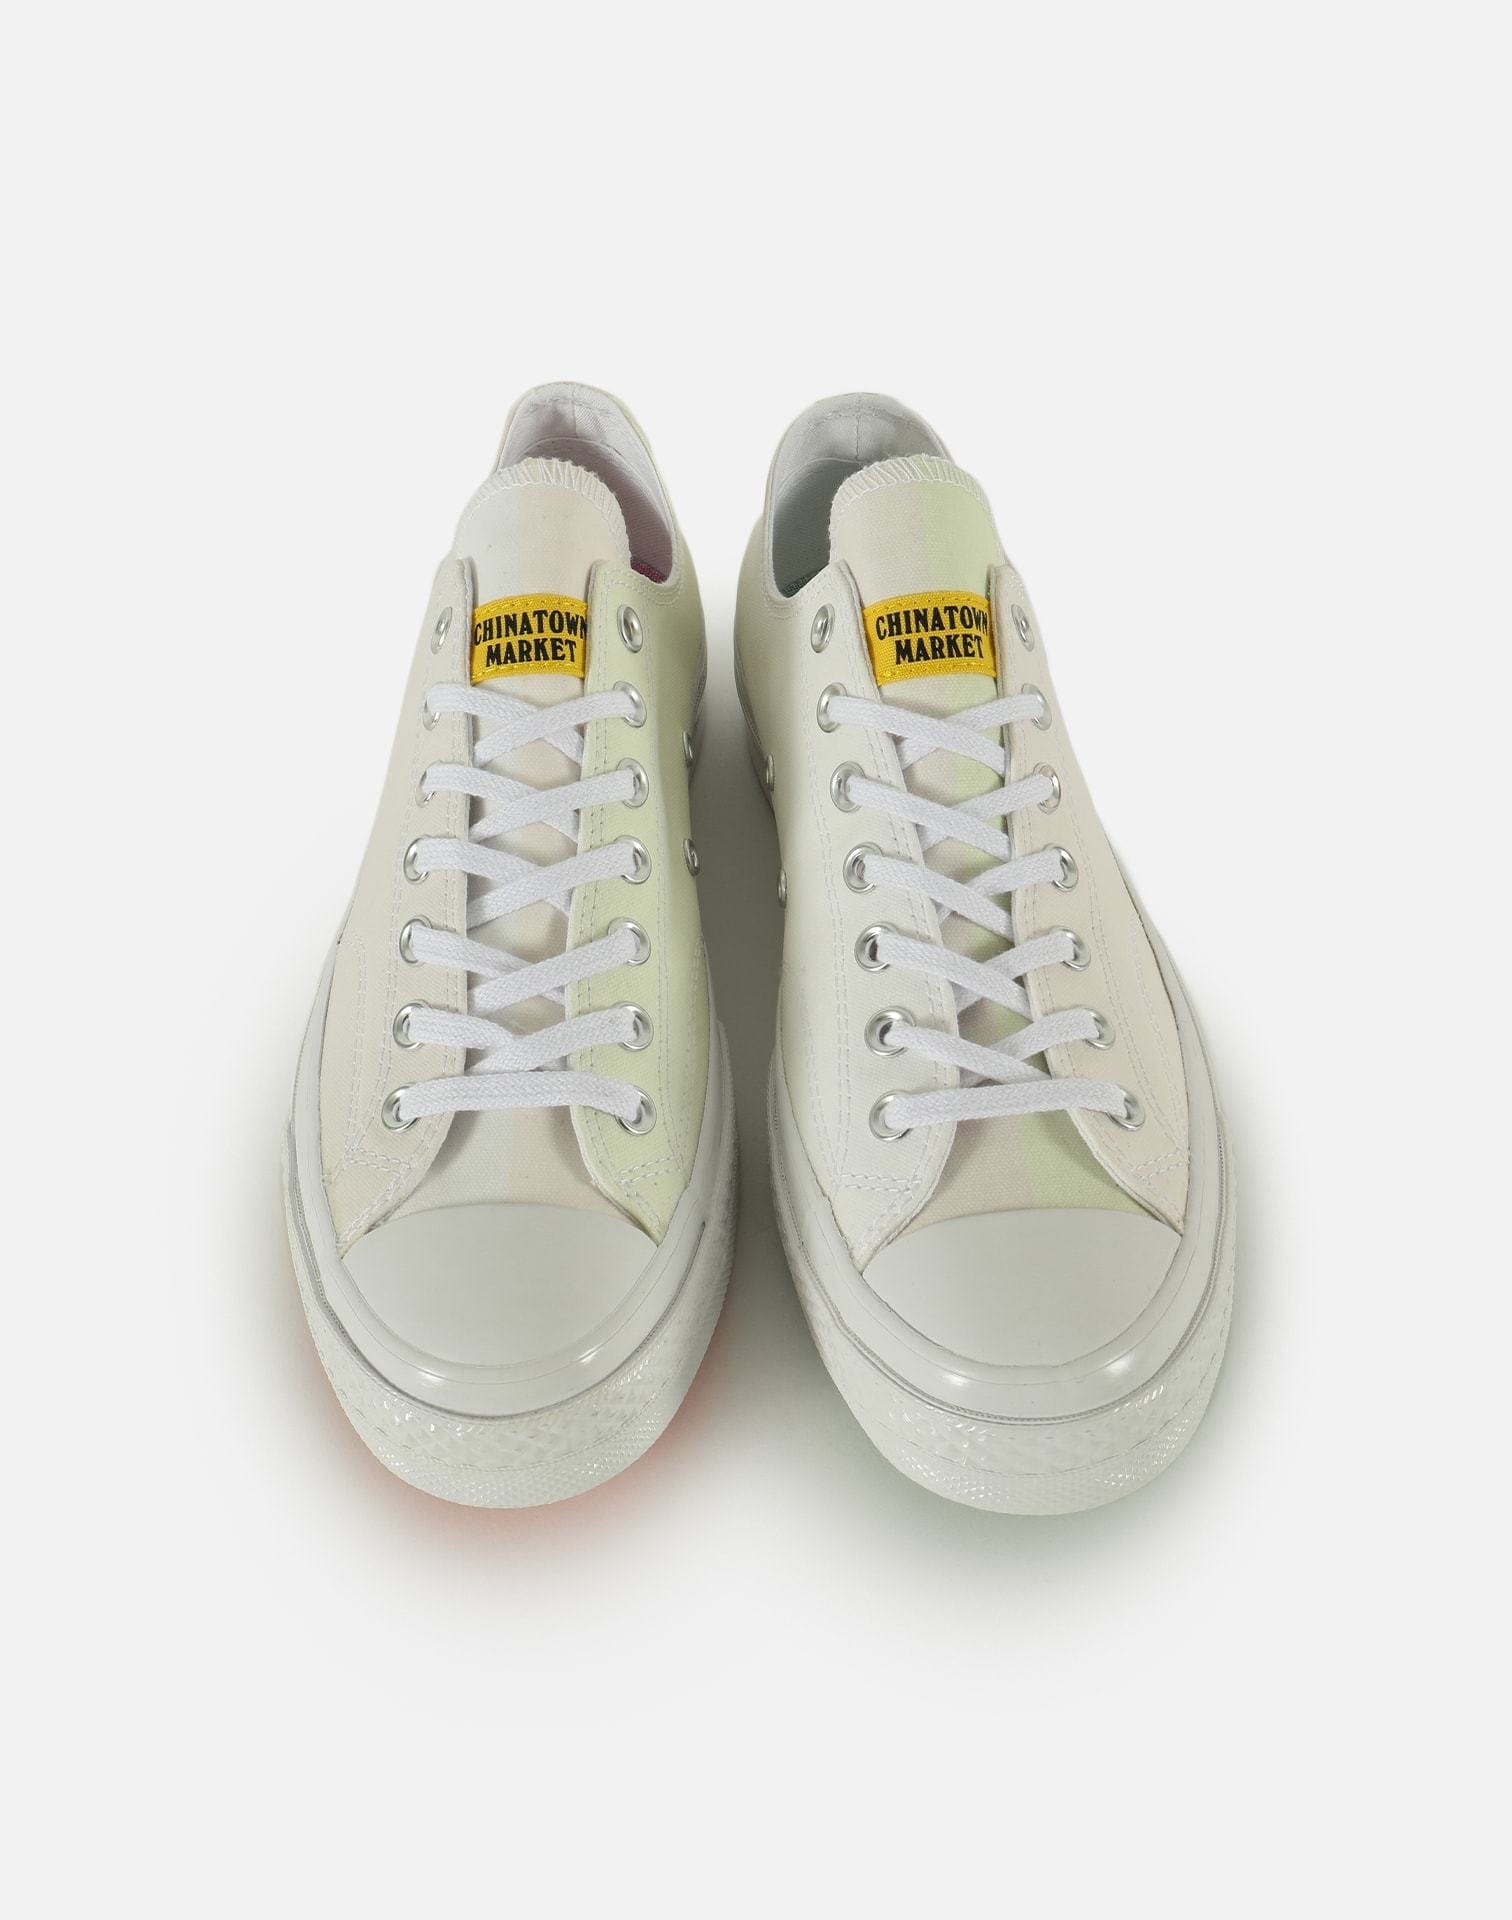 Converse x Chinatown Market Men's Chuck Taylor All-Star 70 Low